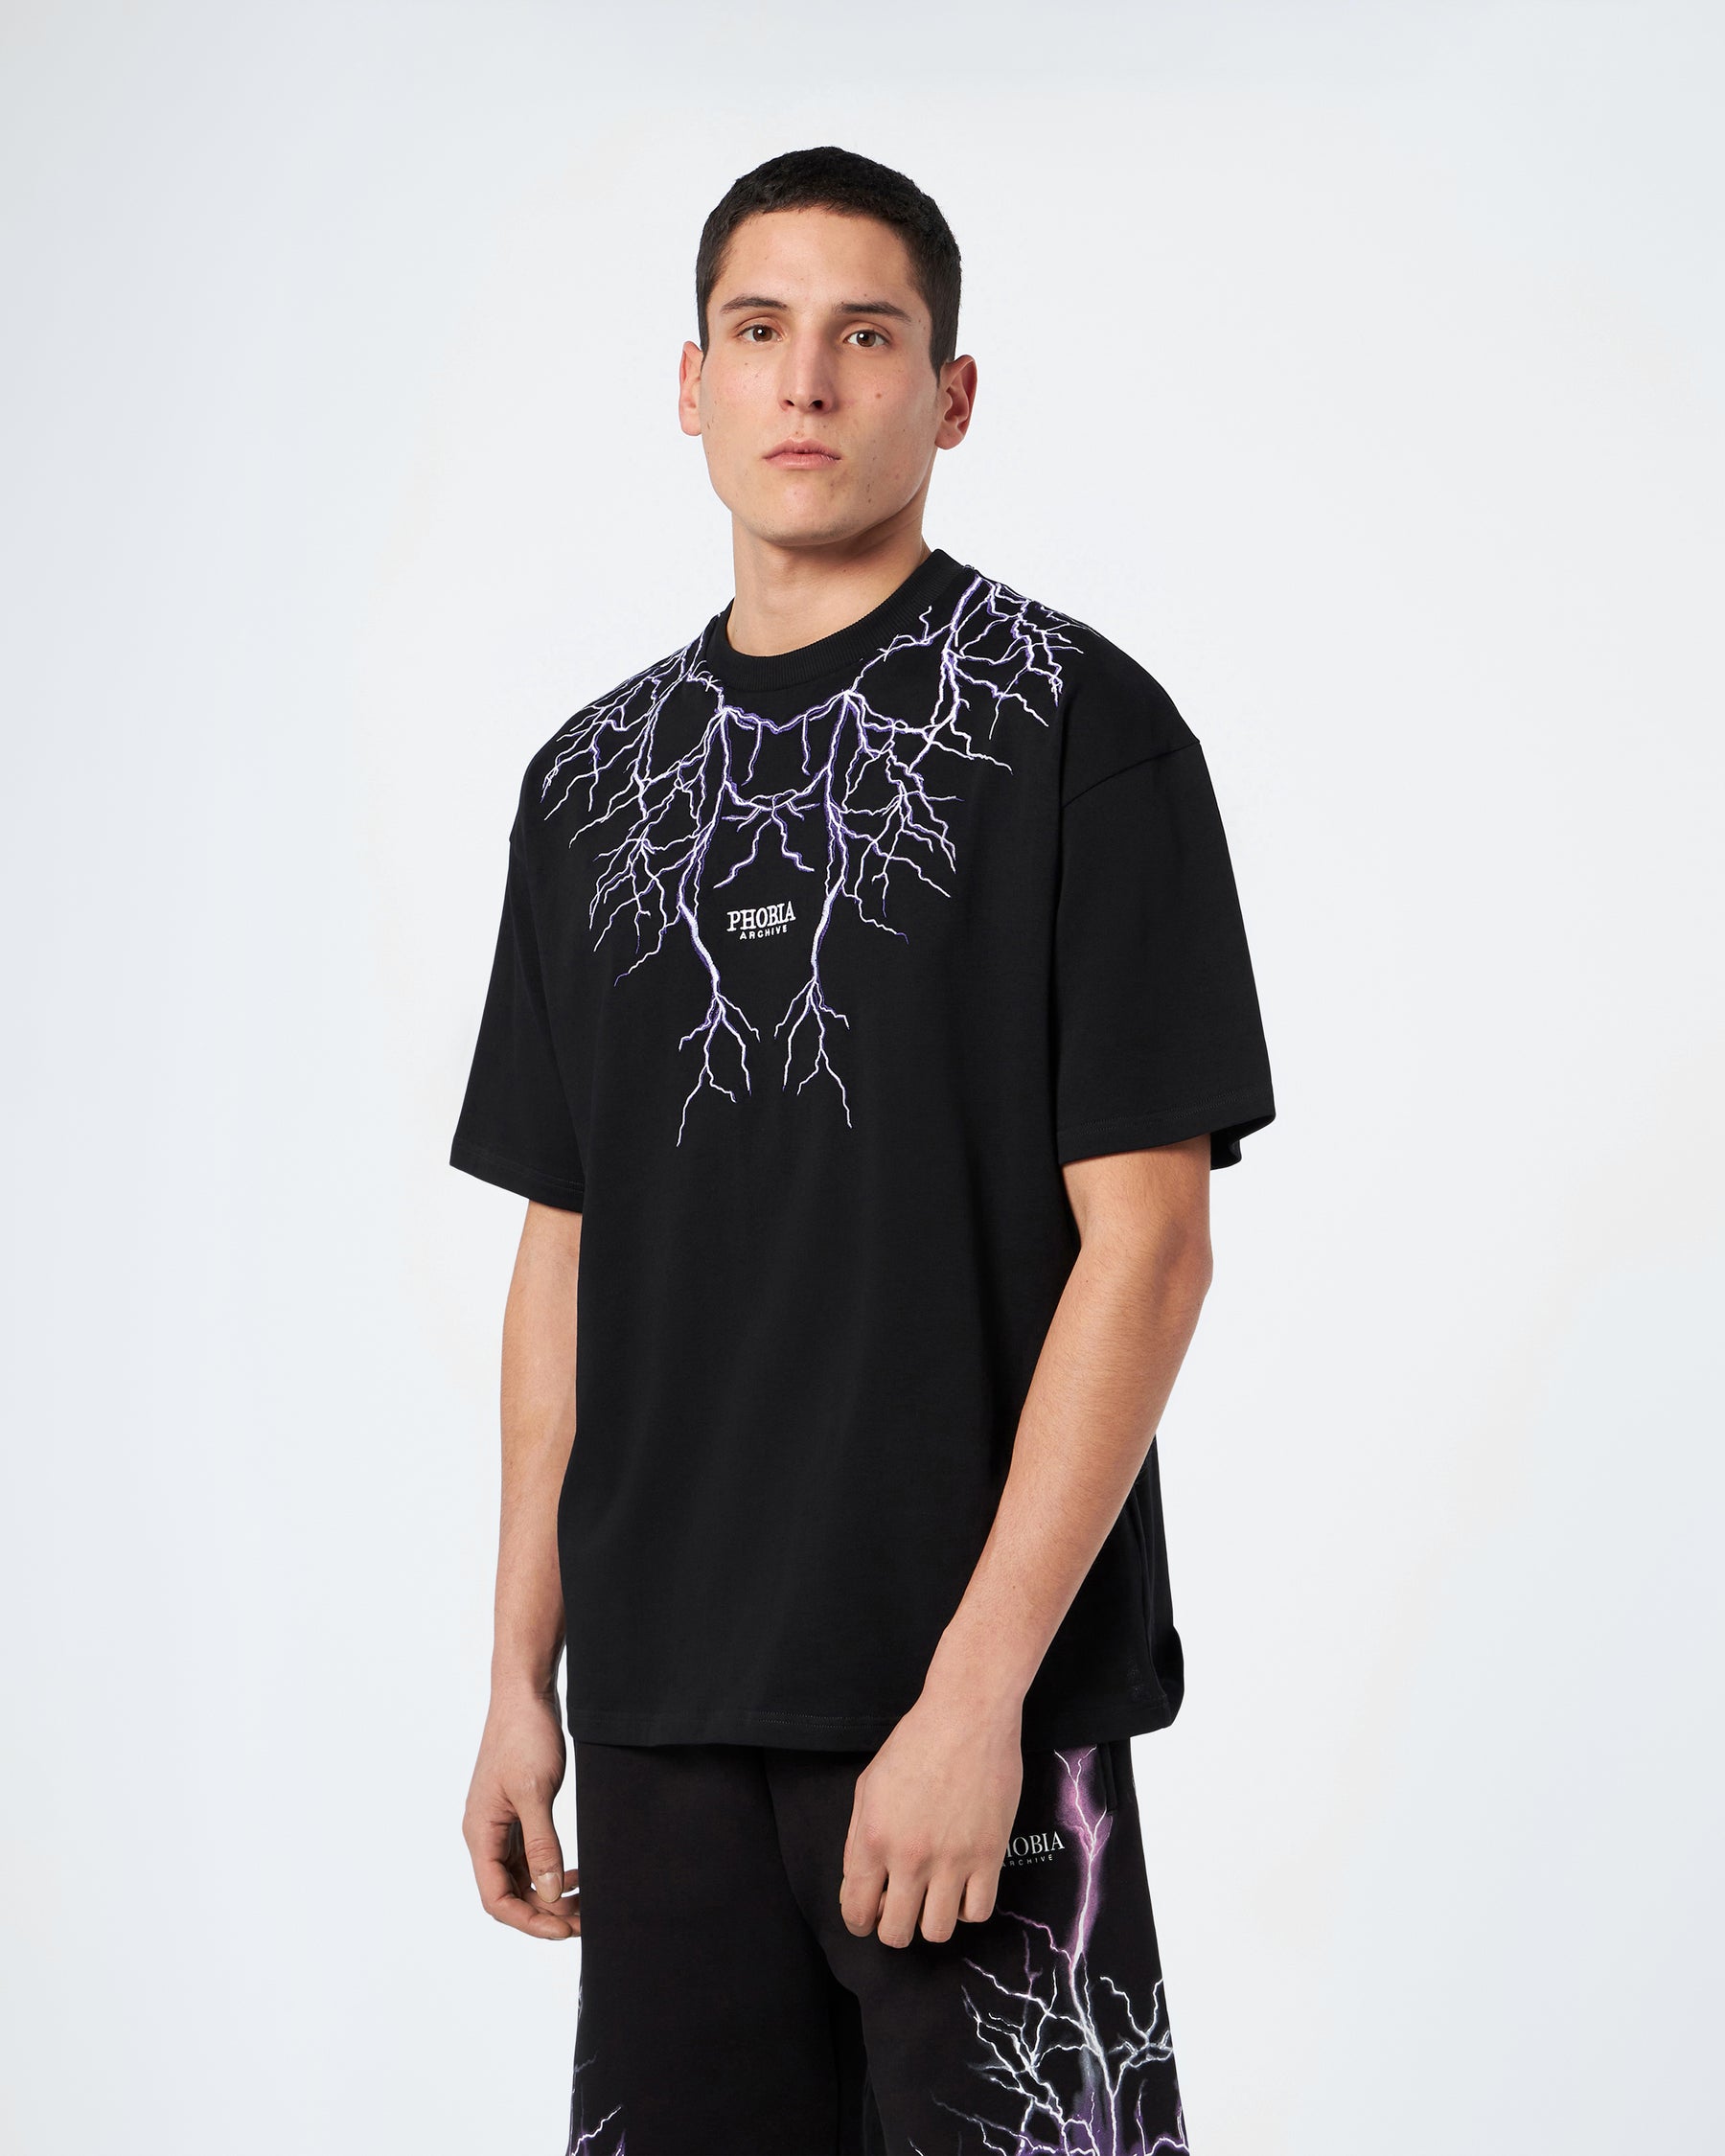 PHOBIA BLACK T-SHIRT WITH PURPLE EMBROIDERY LIGHTNING